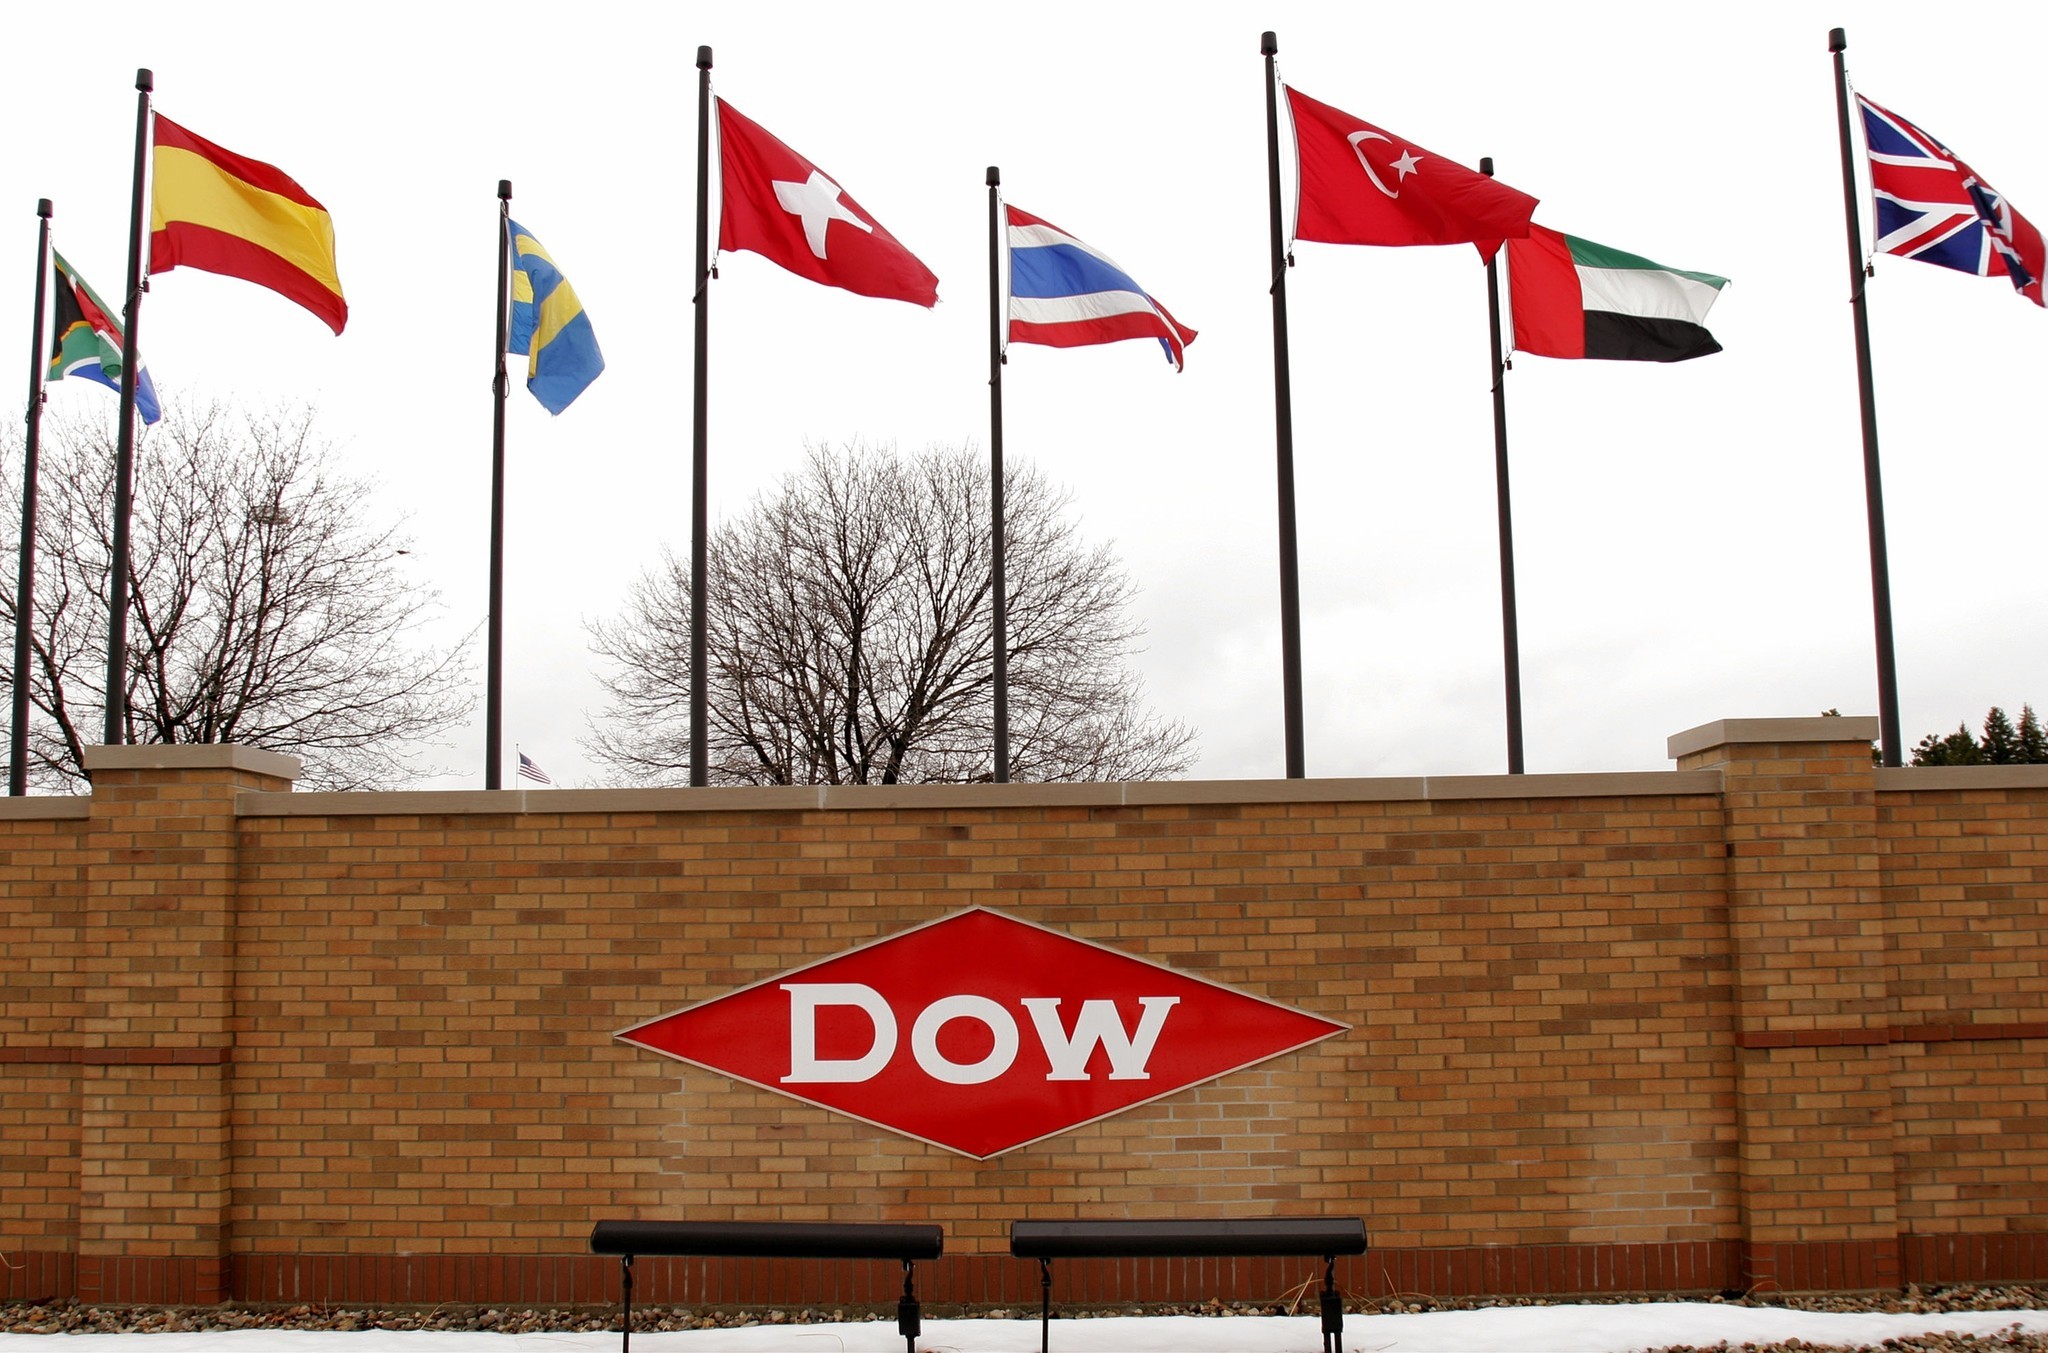 Dow is a diversified chemicals company headquartered in the United States